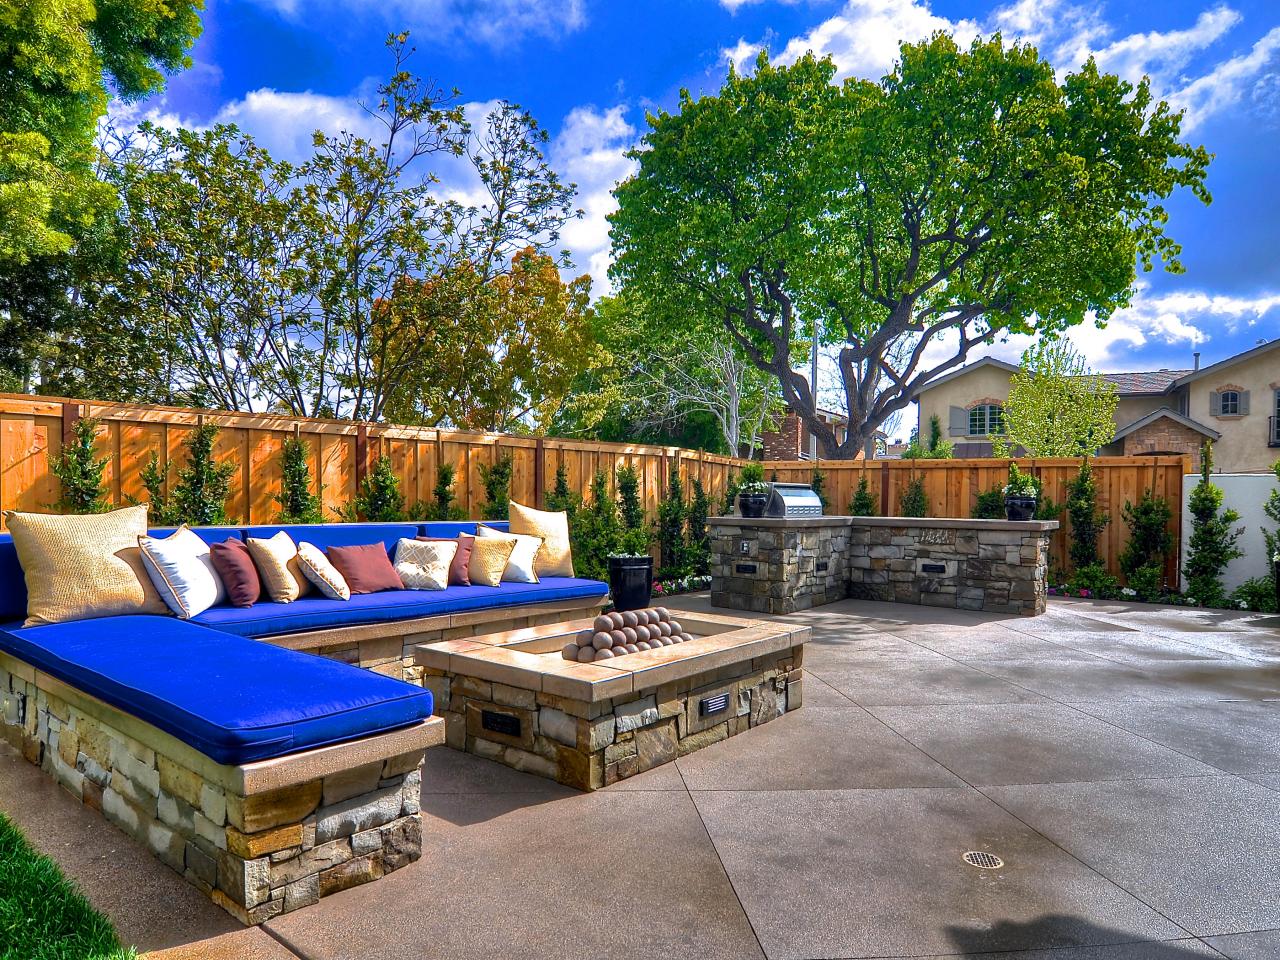 Patio Ideas to Make Your Backyard the Ideal Summer Escape